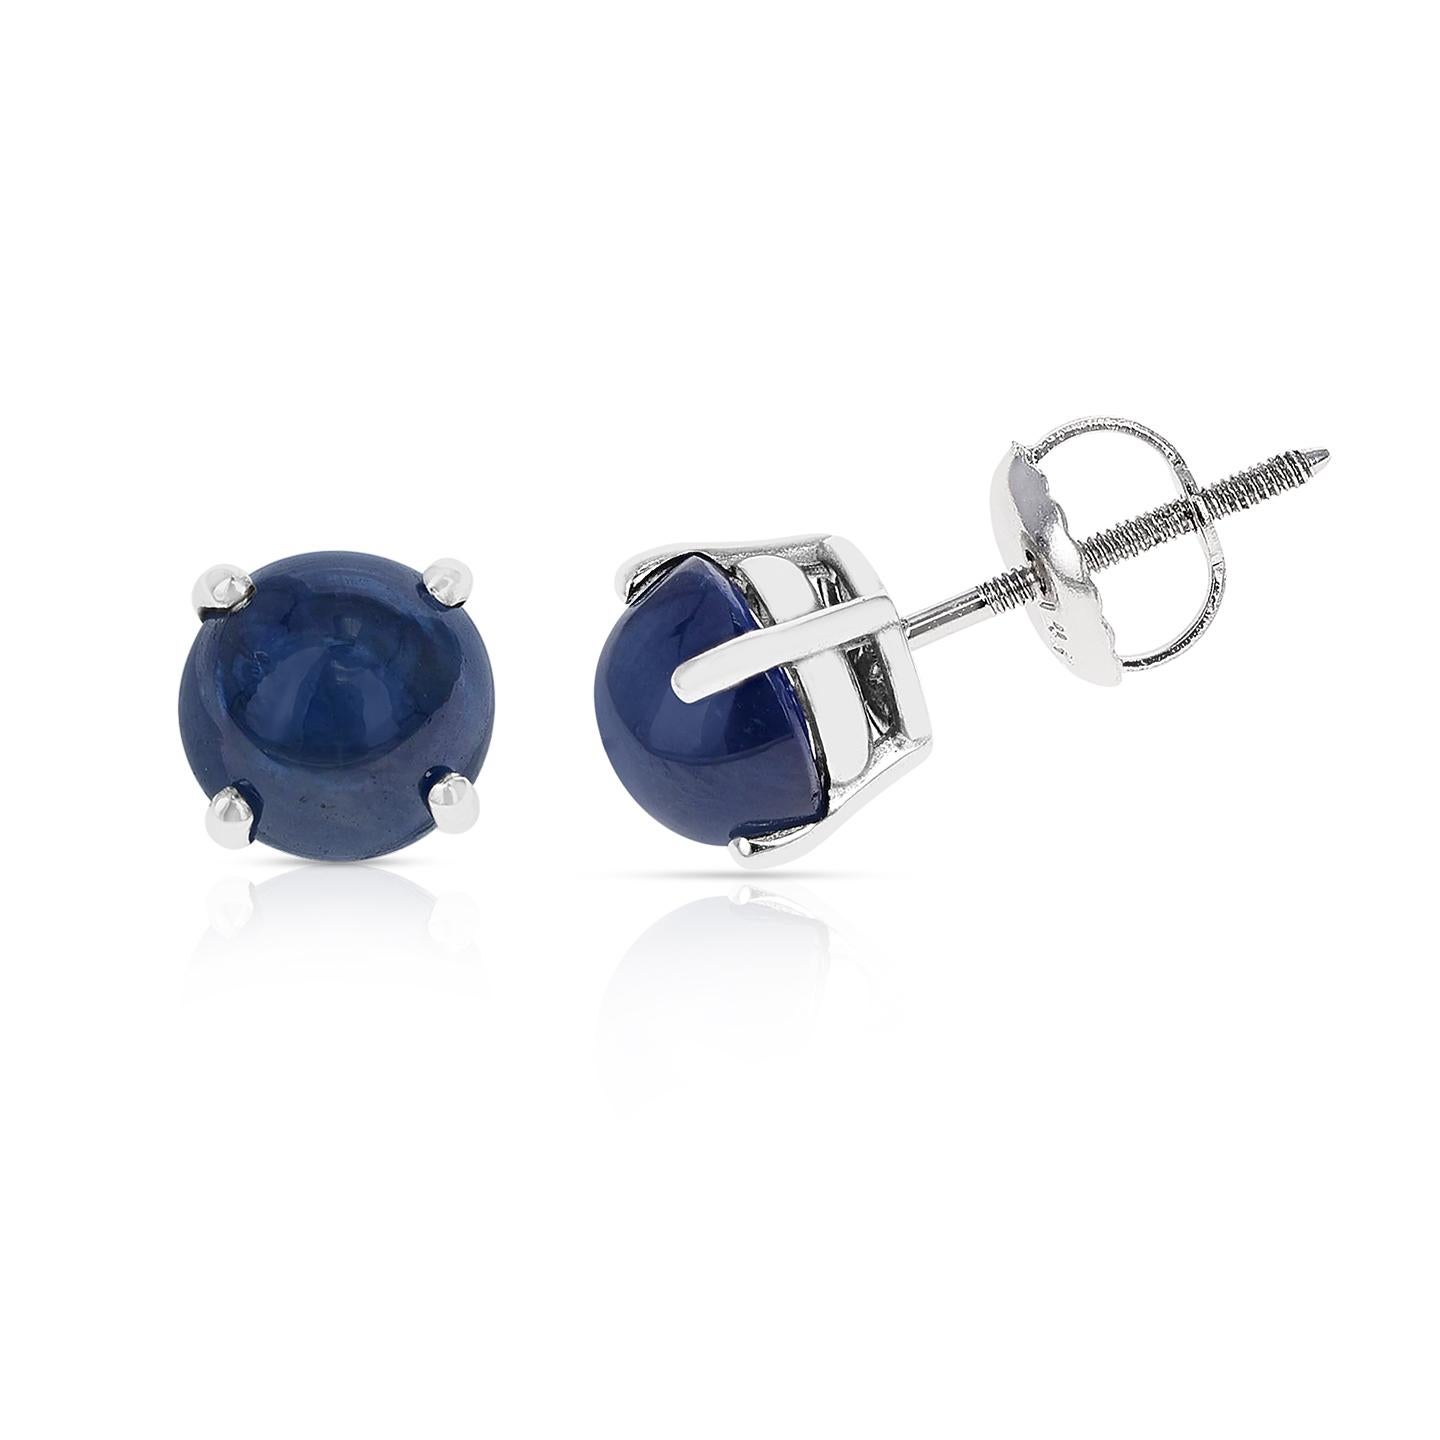 Round Cut Blue Sapphire Round Cabochon Stud Earrings Made in 14 Karat White Gold